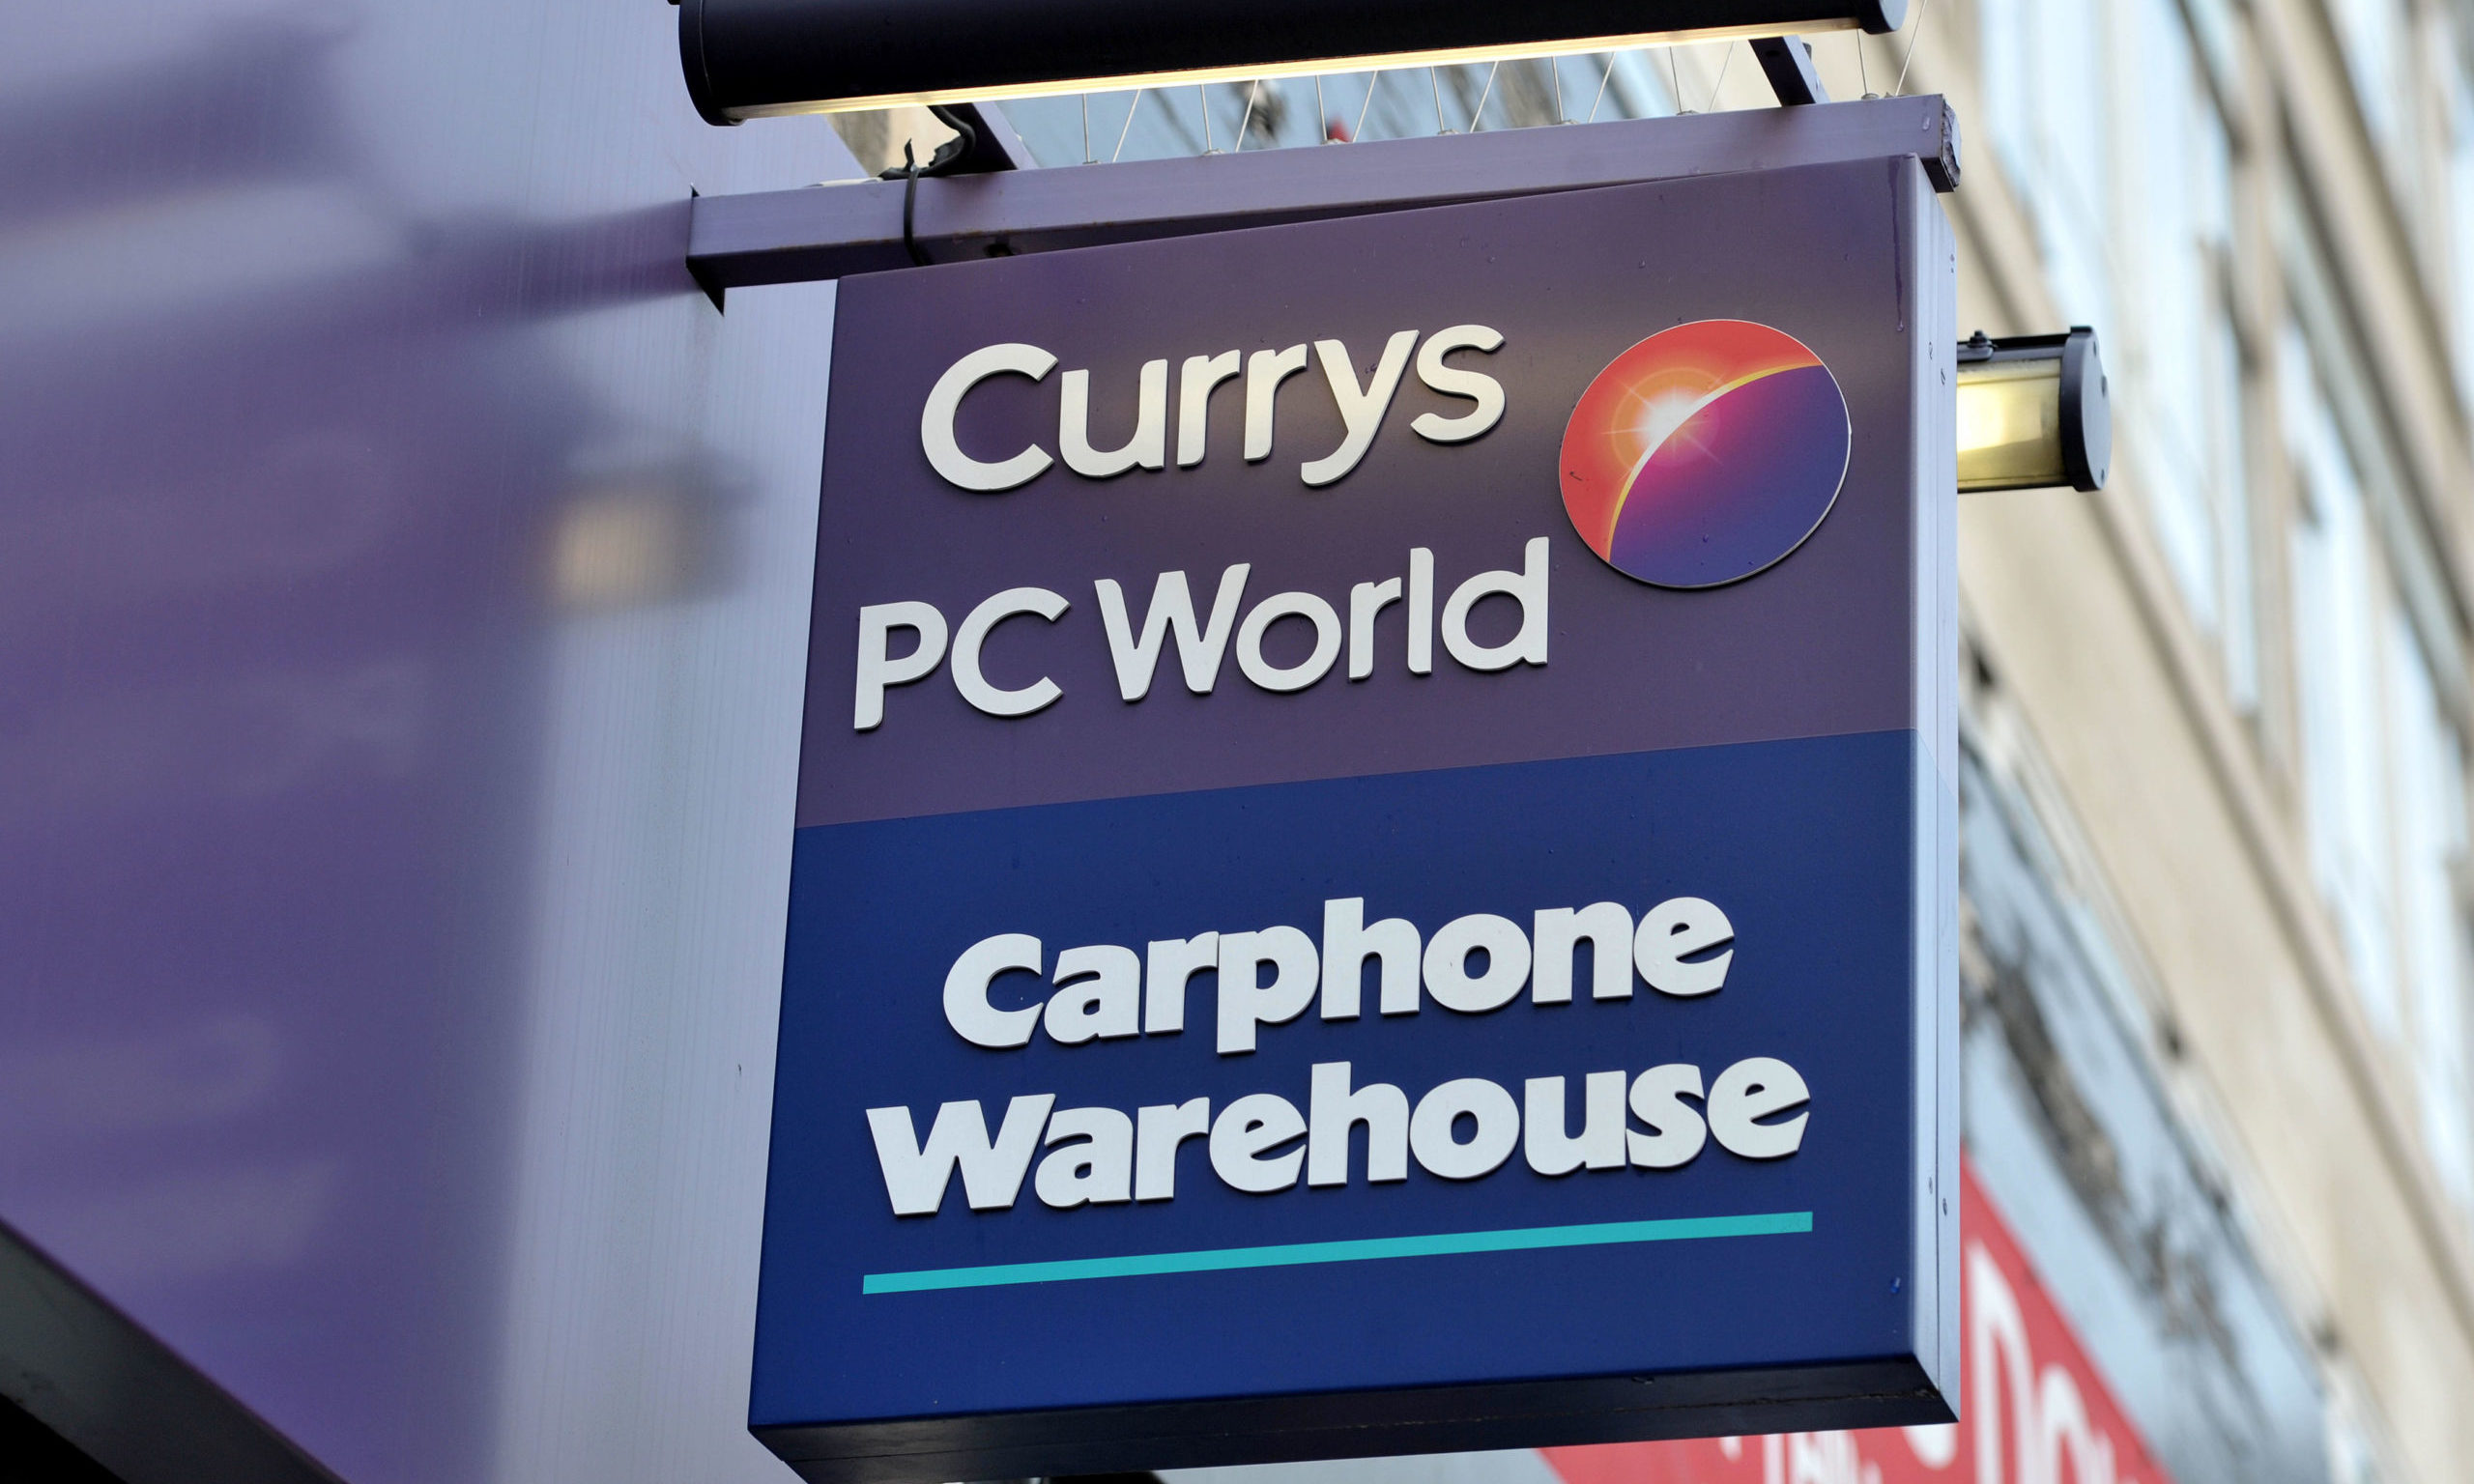 A Currys PC World sign